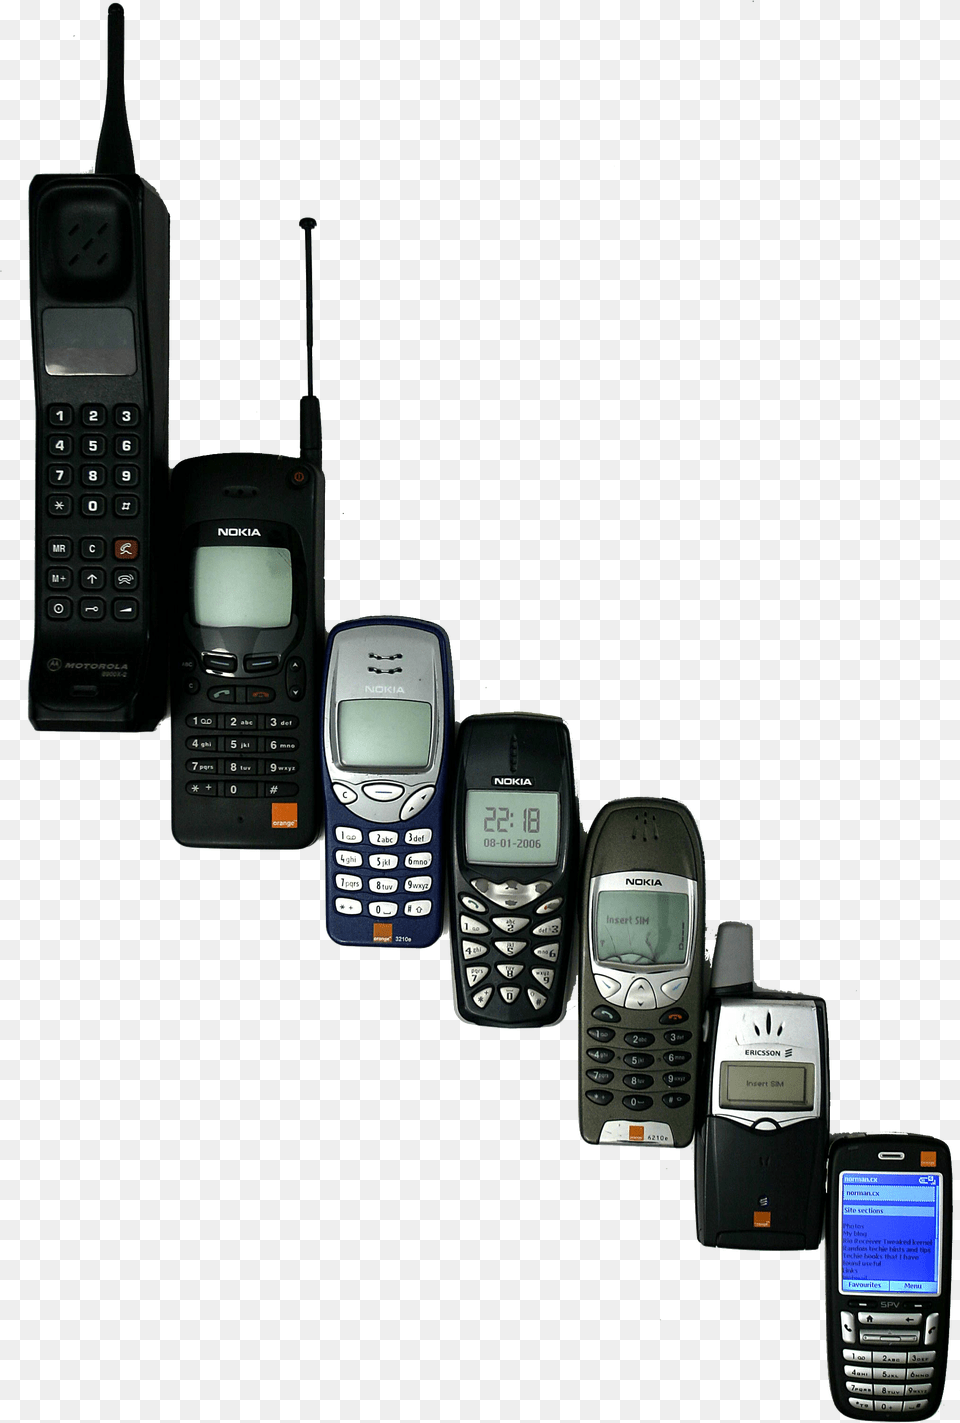 Mobilephoneevolutionpng Mobile Phone History The First Telephone, Electronics, Mobile Phone, Texting Free Png